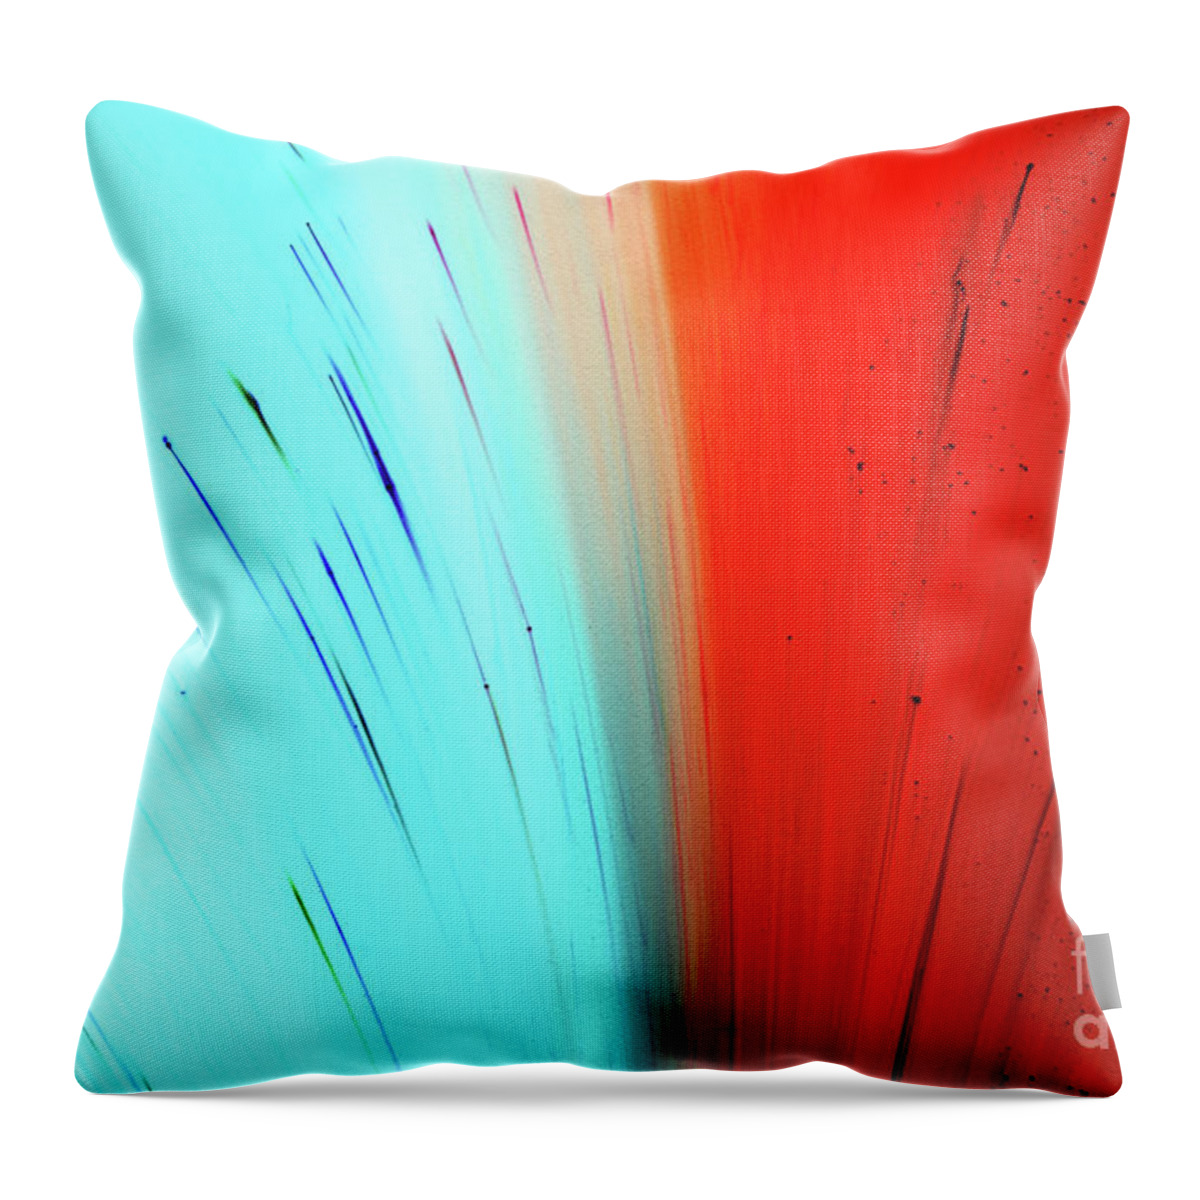 California Throw Pillow featuring the photograph Red And Blue Dyes Exploding In Liquid by Mimi Haddon